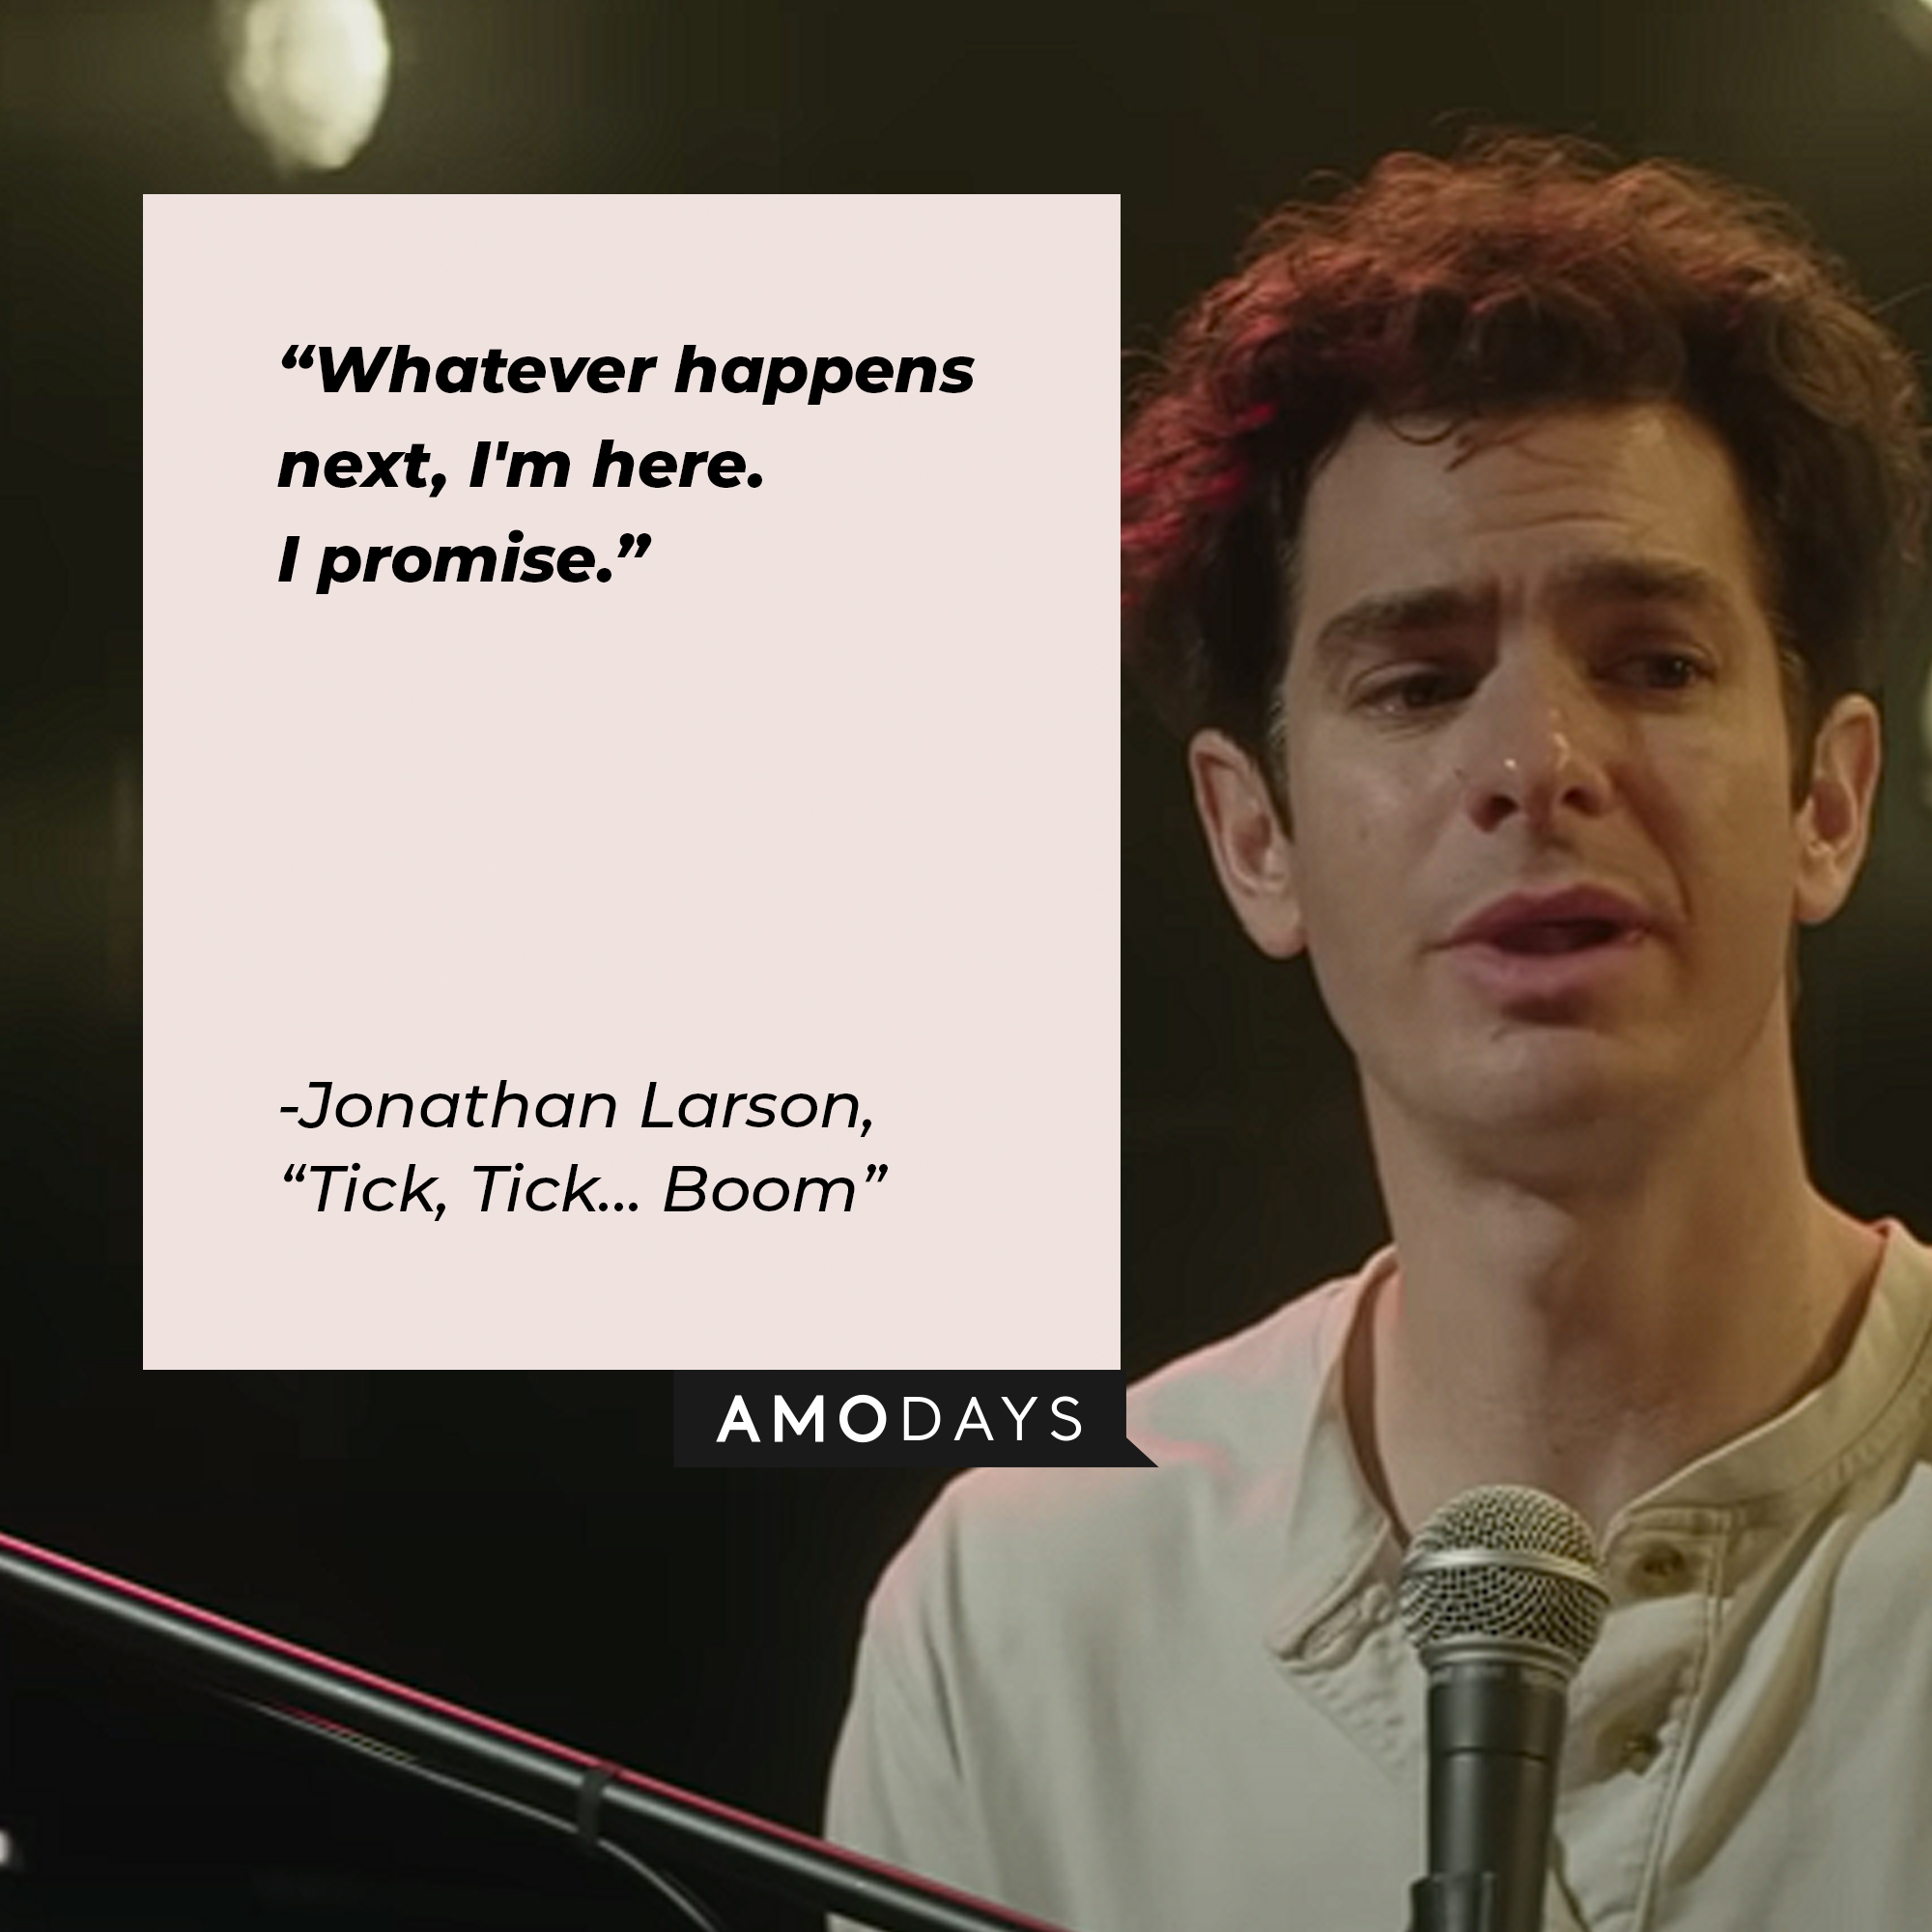 Jonathan Larson with his quote: “Whatever happens next, I'm here. I promise."  | Source: Youtube.com/Netflix